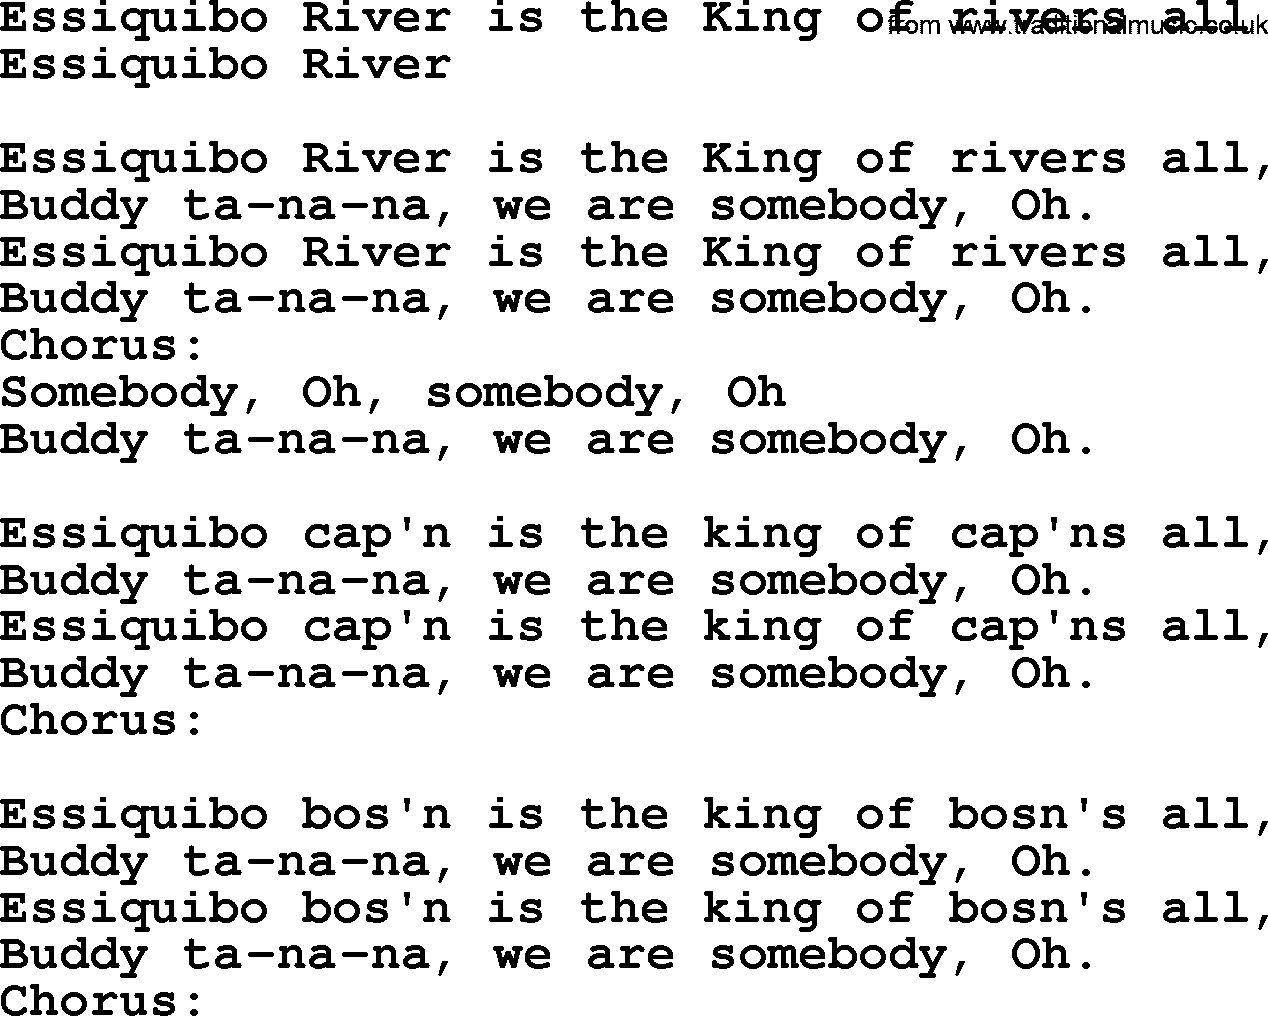 Sea Song or Shantie: Essiquibo River Is The King Of Rivers All, lyrics